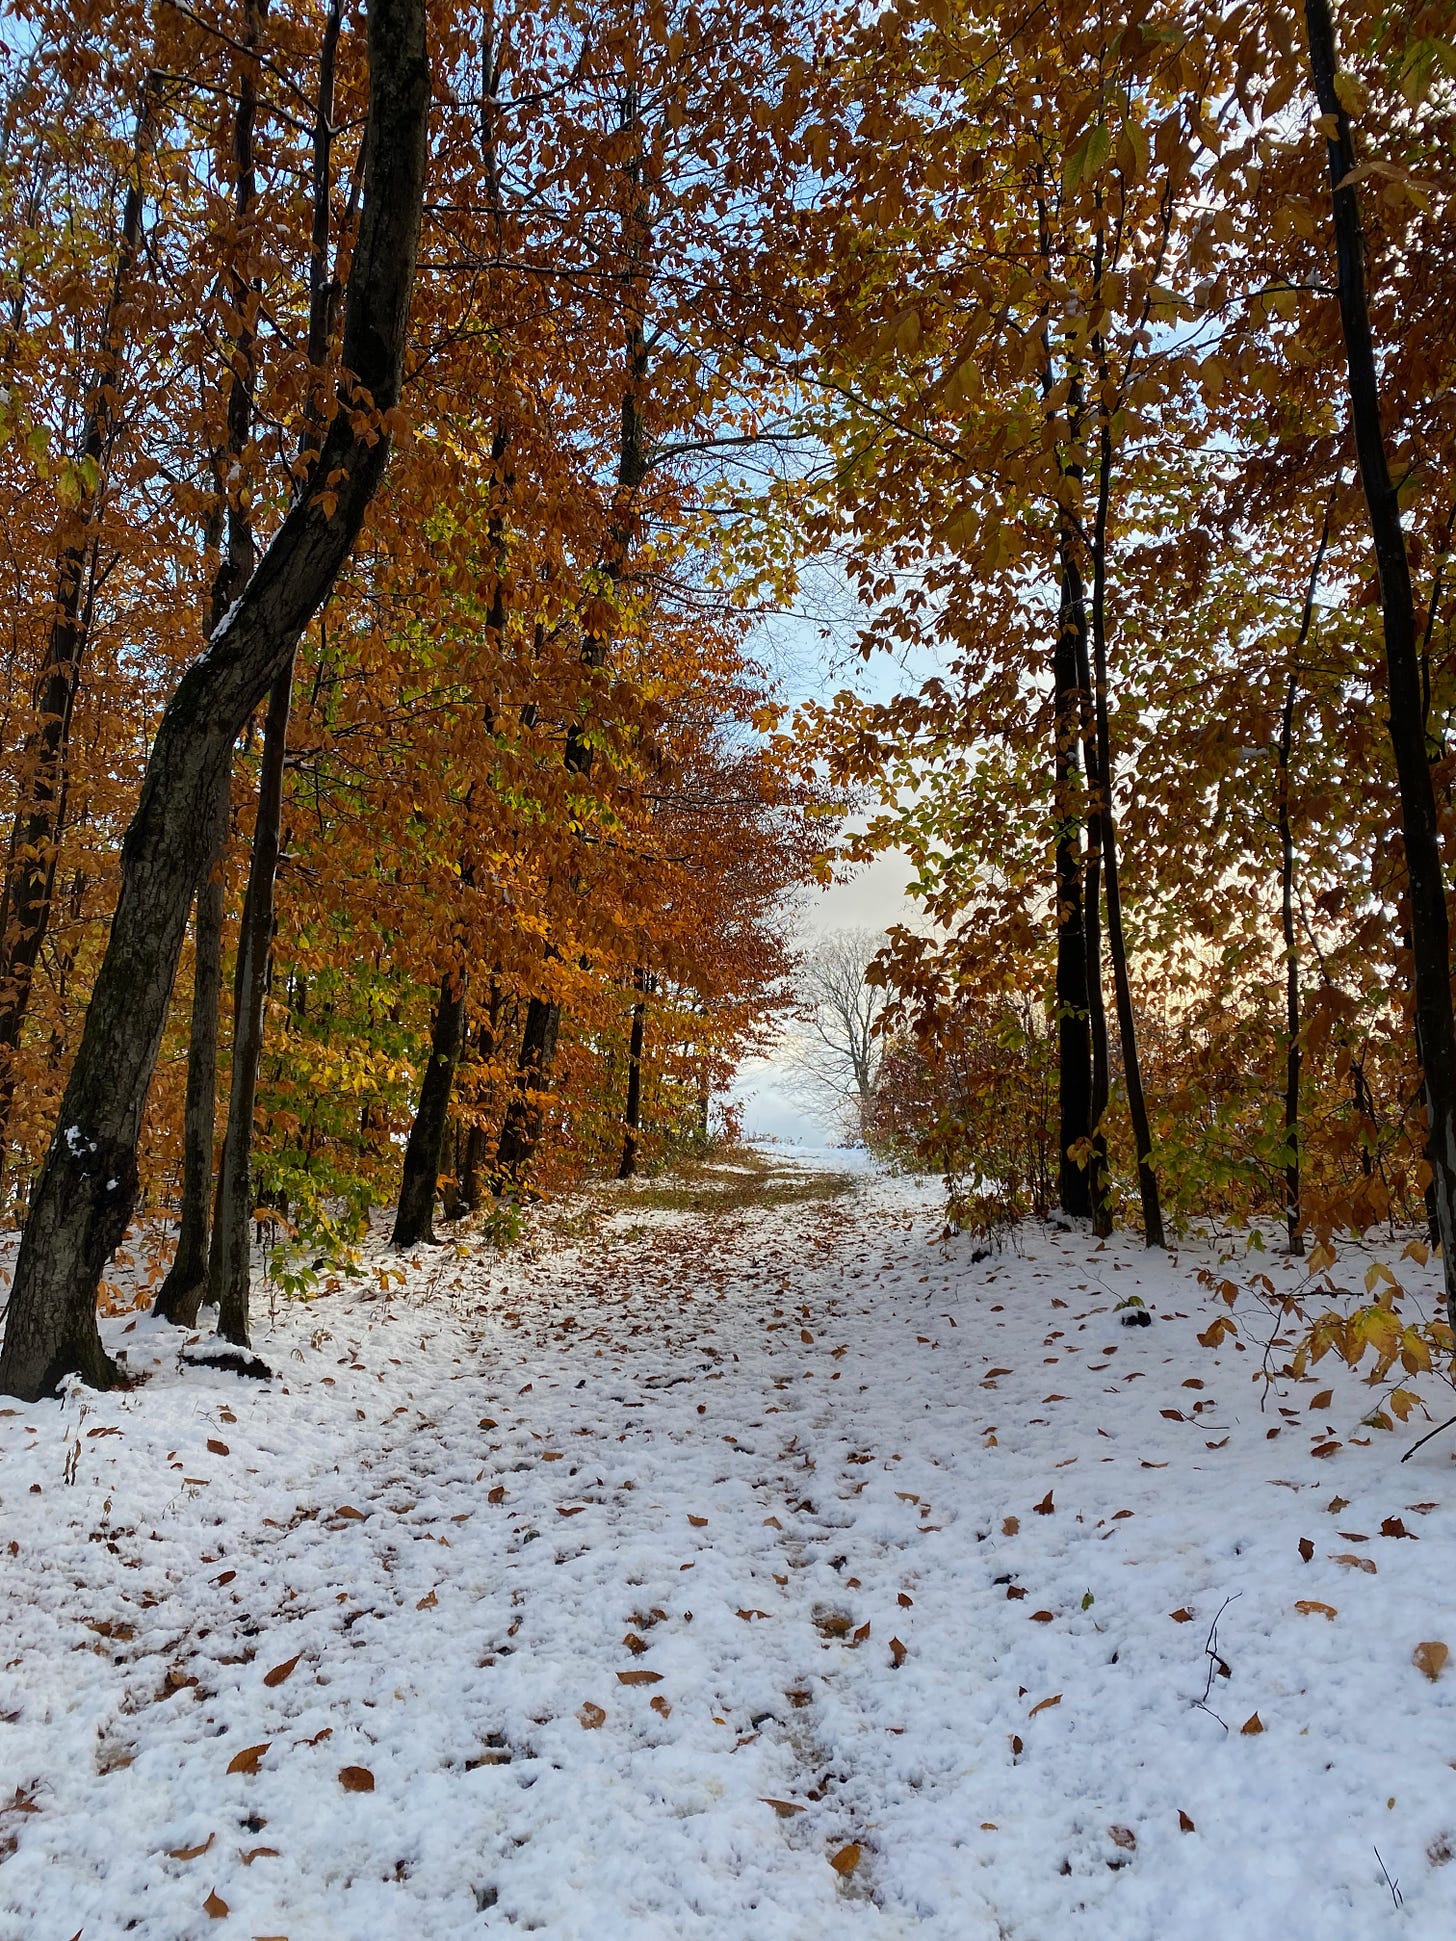 A snowy path through a grove of golden beech trees, their leaves lit up in the afternoon sun.